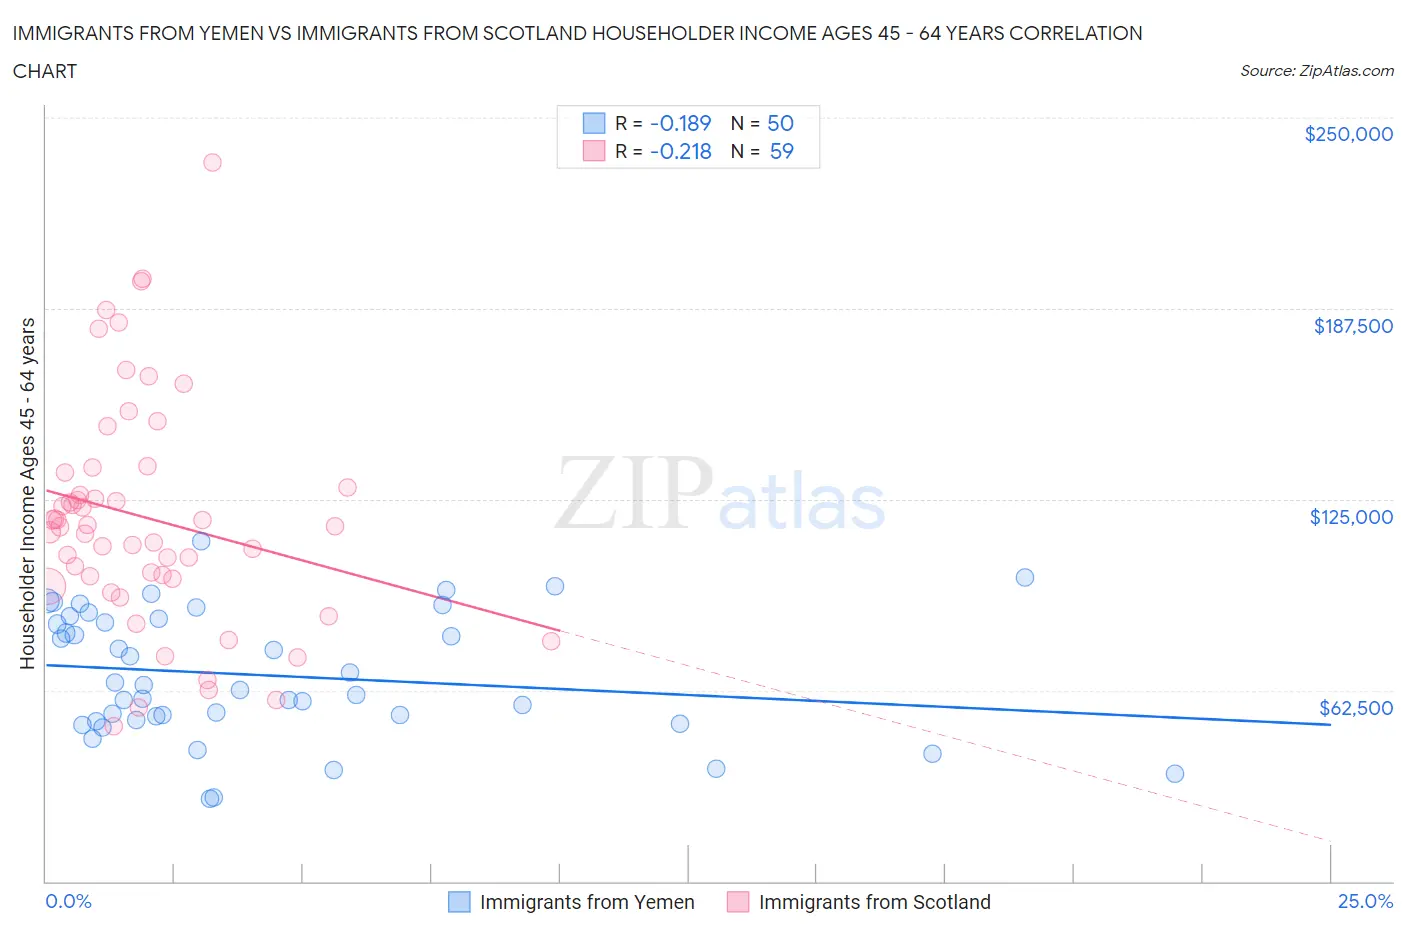 Immigrants from Yemen vs Immigrants from Scotland Householder Income Ages 45 - 64 years